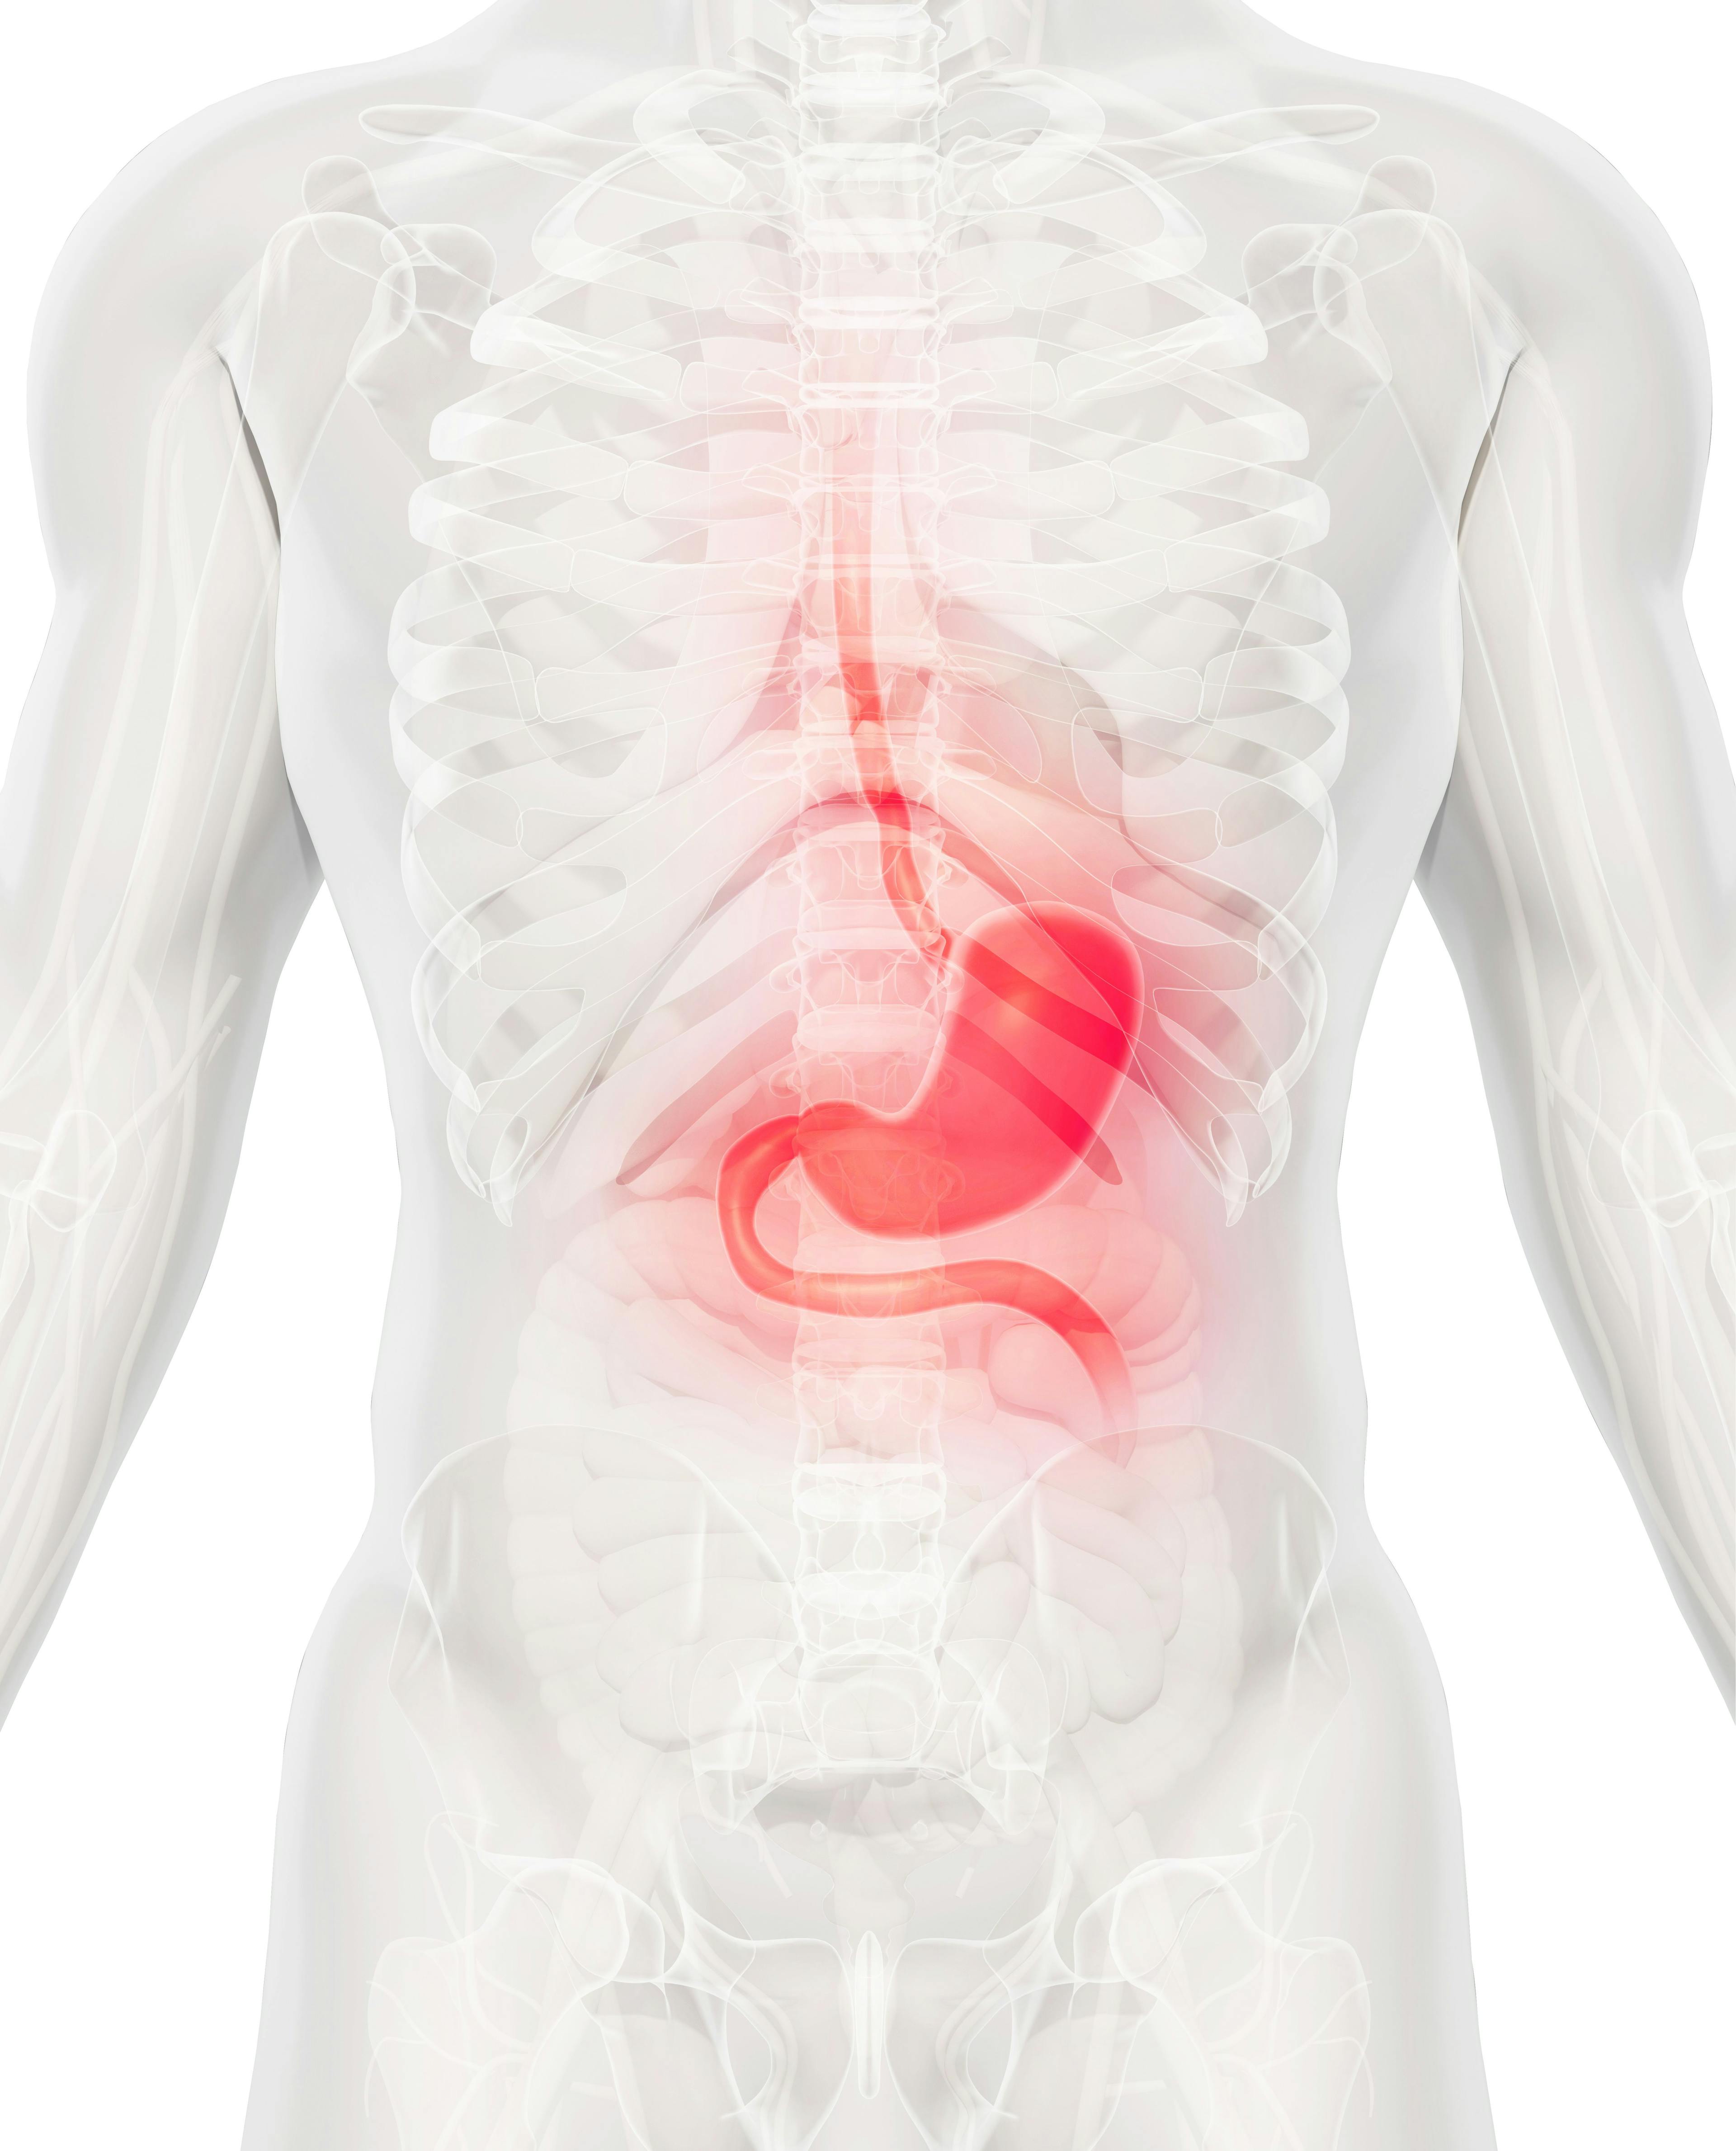 Findings from the FRUTIGA study support fruquintinib plus paclitaxel as a promising second-line treatment for those with advanced gastric or gastroesophageal junction adenocarcinoma following prior chemotherapy.